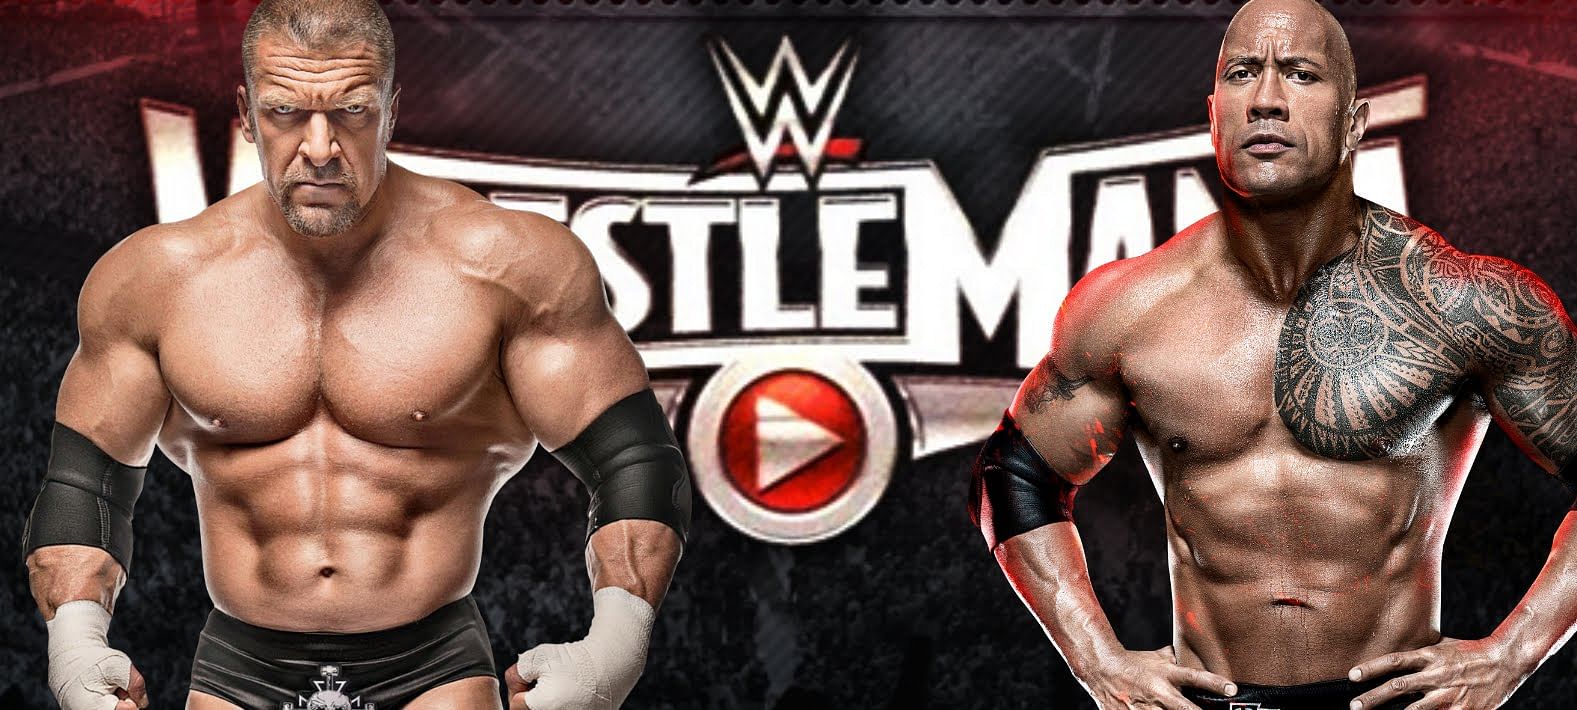 Updates on The Rock, Sting and Triple H regarding Wrestlemania 31.